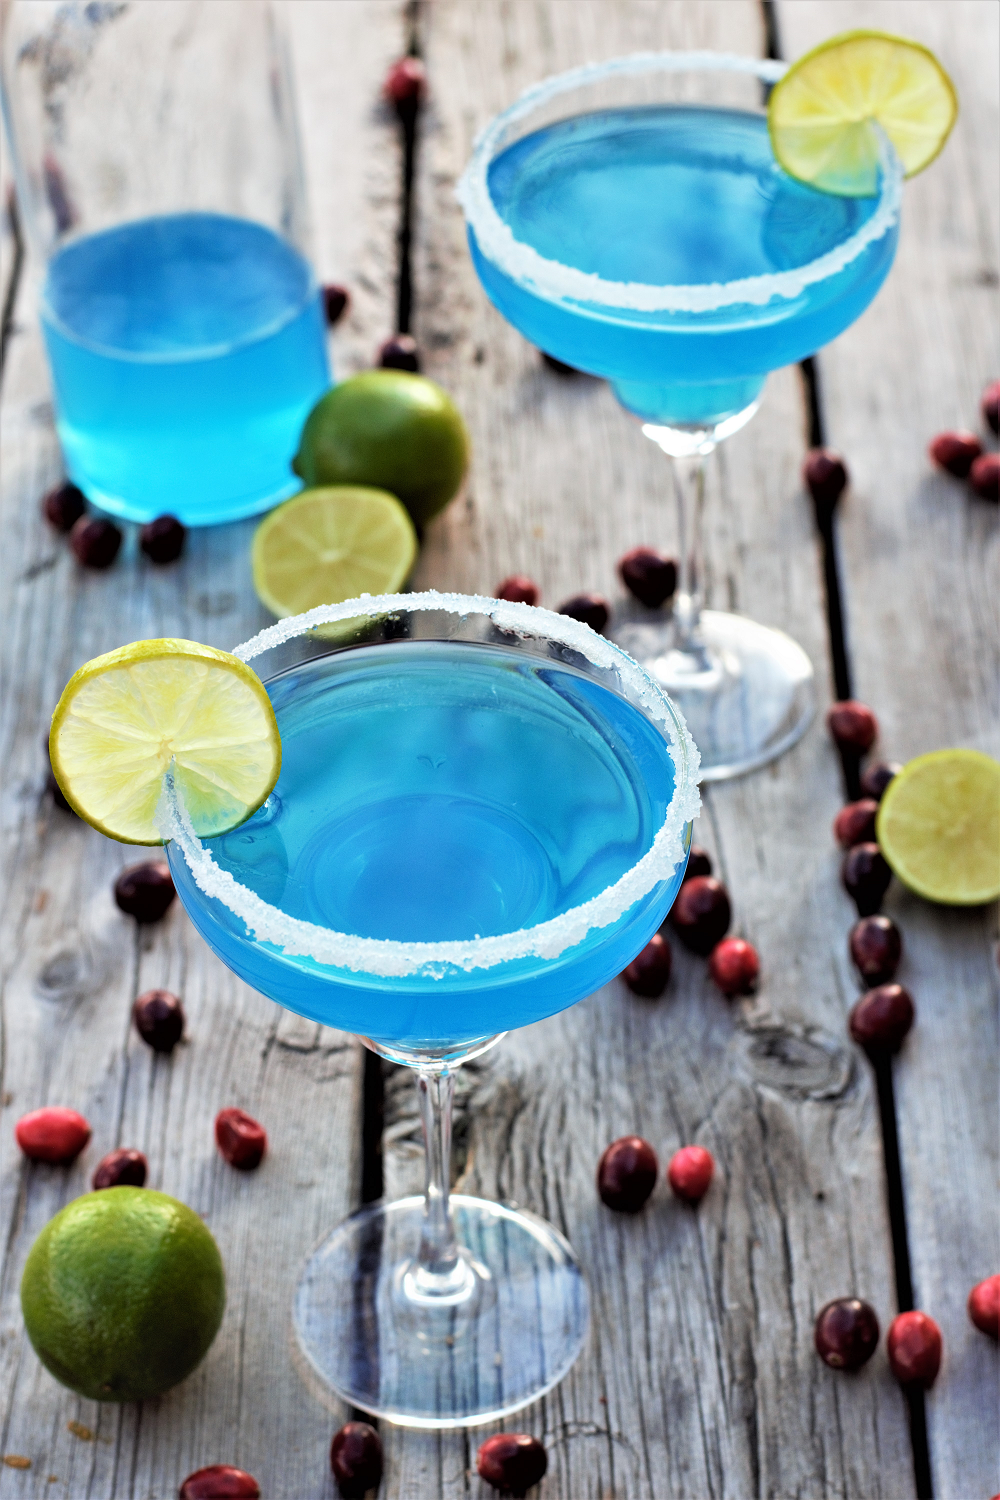 Gorgeous icy blue cocktails with rum, white cranberry, curacao, & lime rimmed with sparkling snowflake sugar to bring on the snow for a blue blue Christmas!